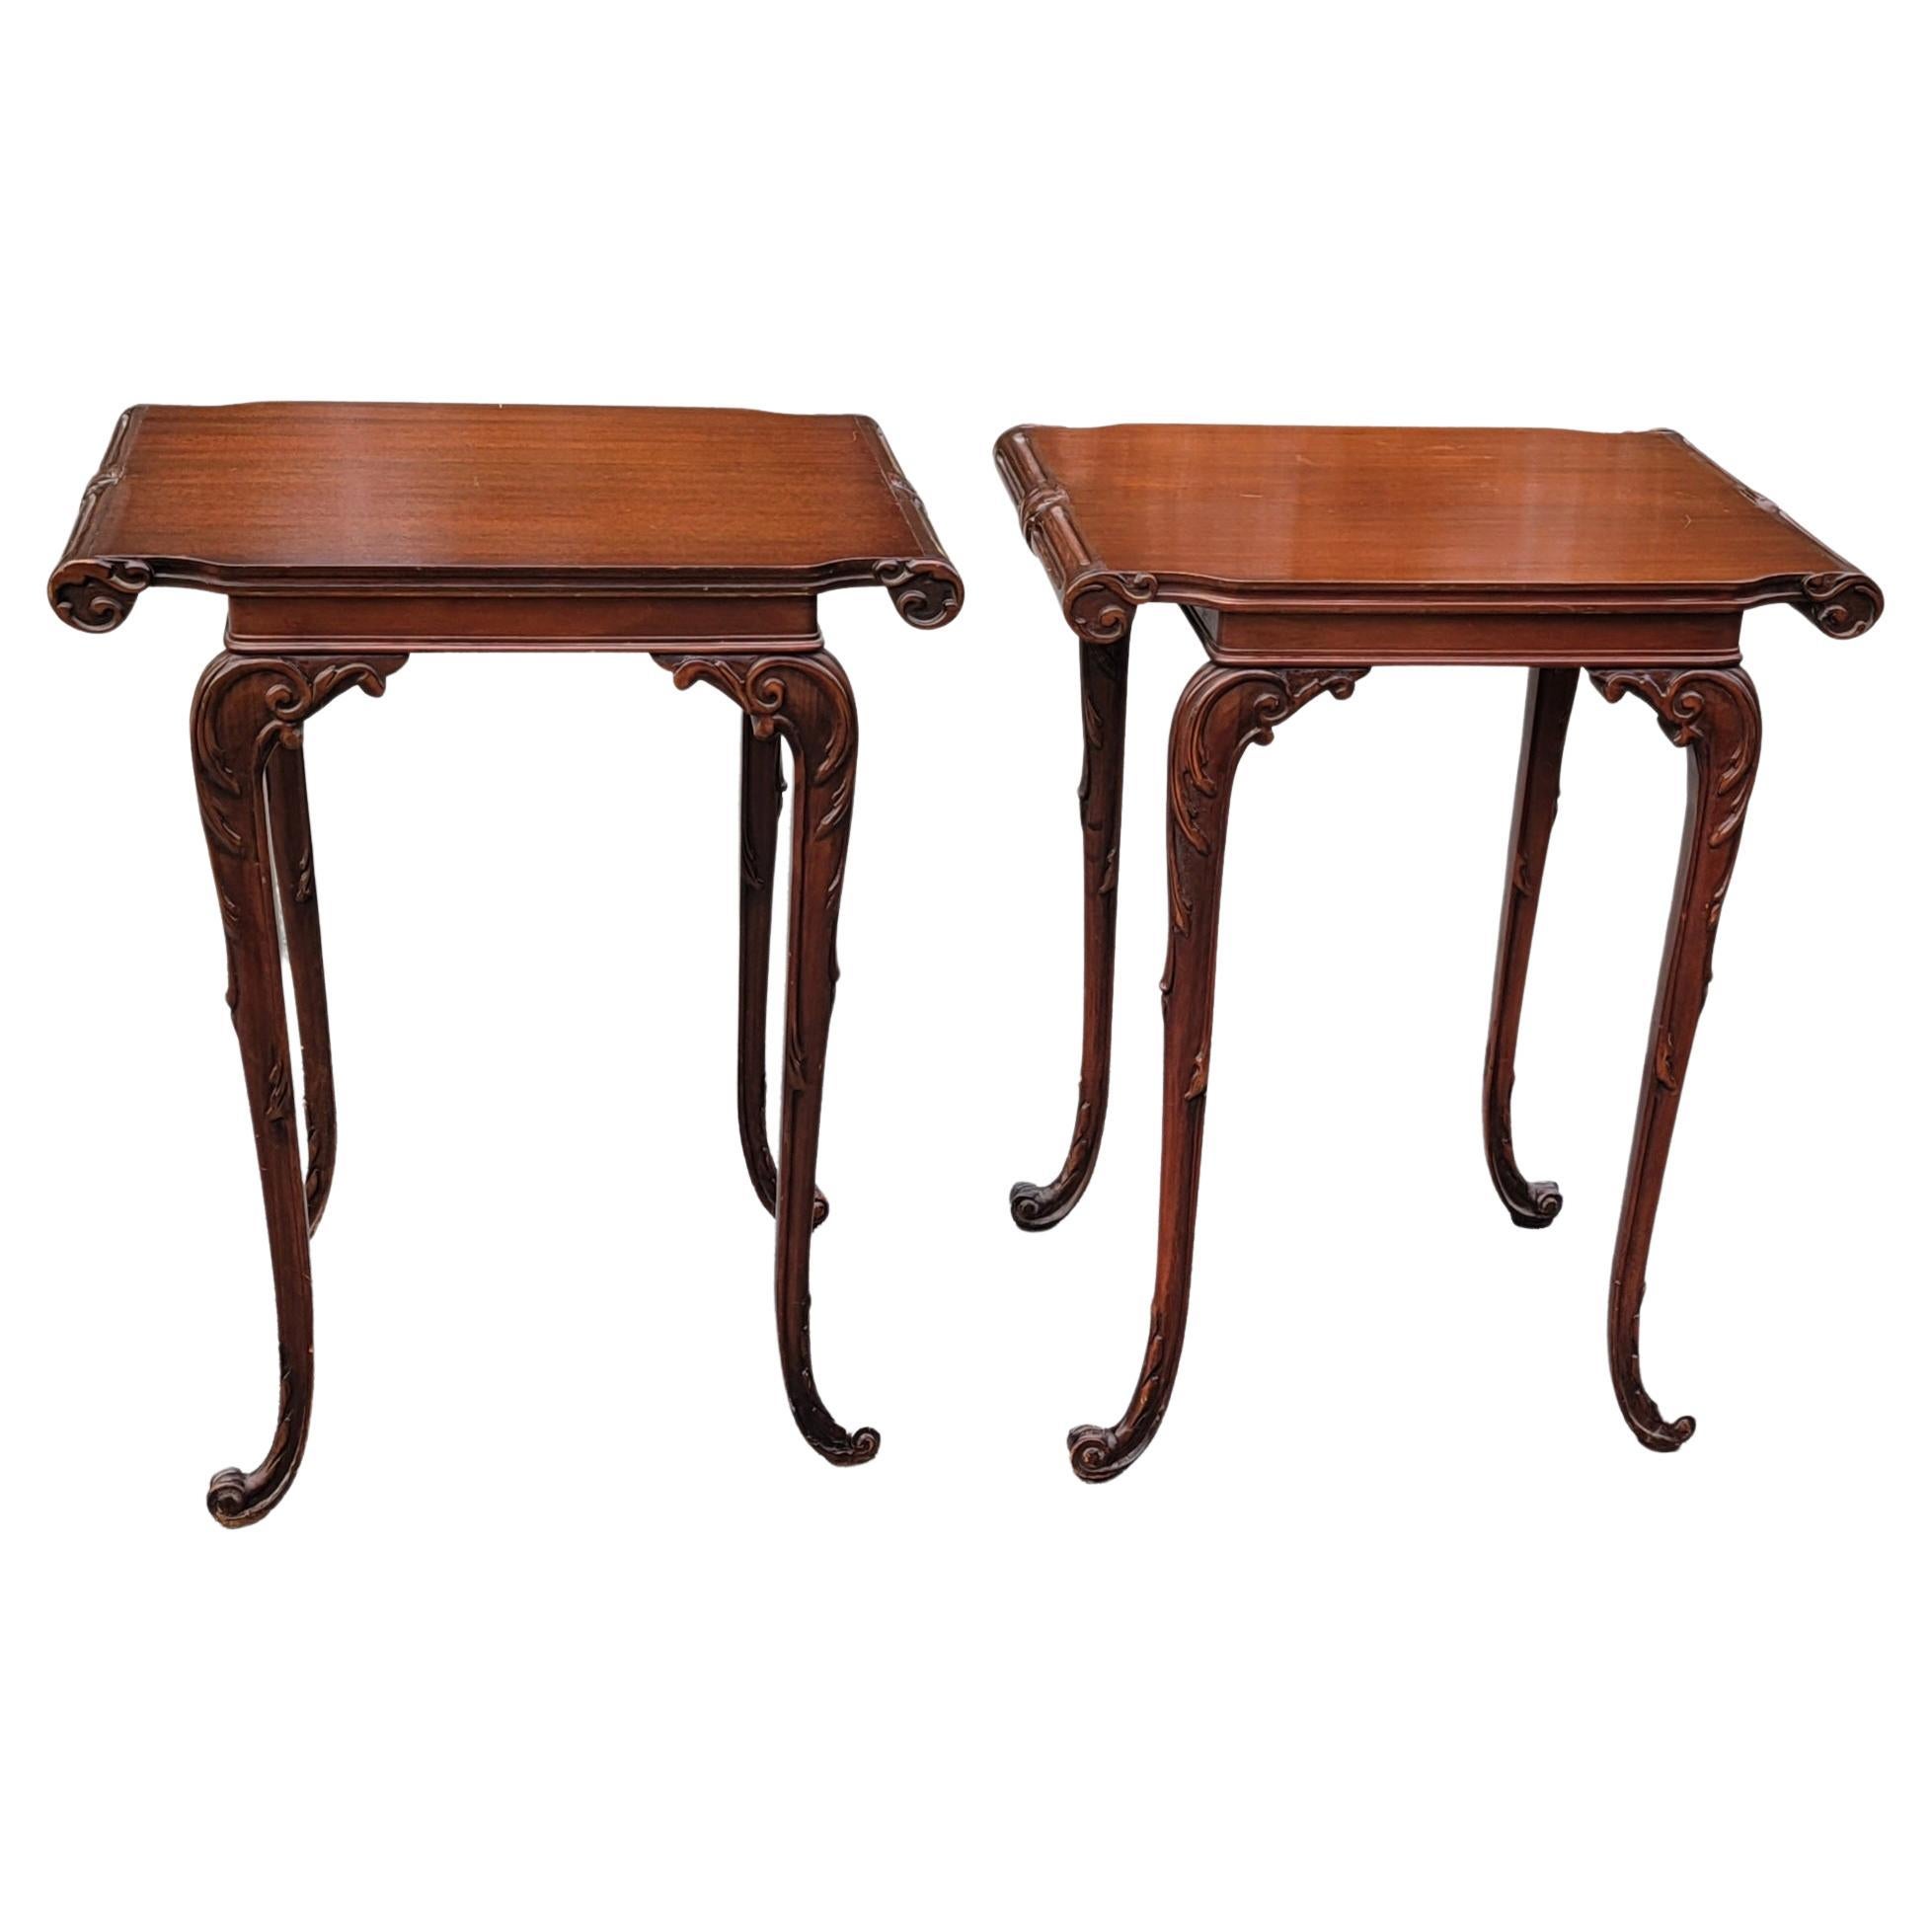 An exquisite pair of Chinese Chippendale style Mahogany End Tables with beautiful carvings.
Very finely crafted. Very good vintage condition.
Measure 22